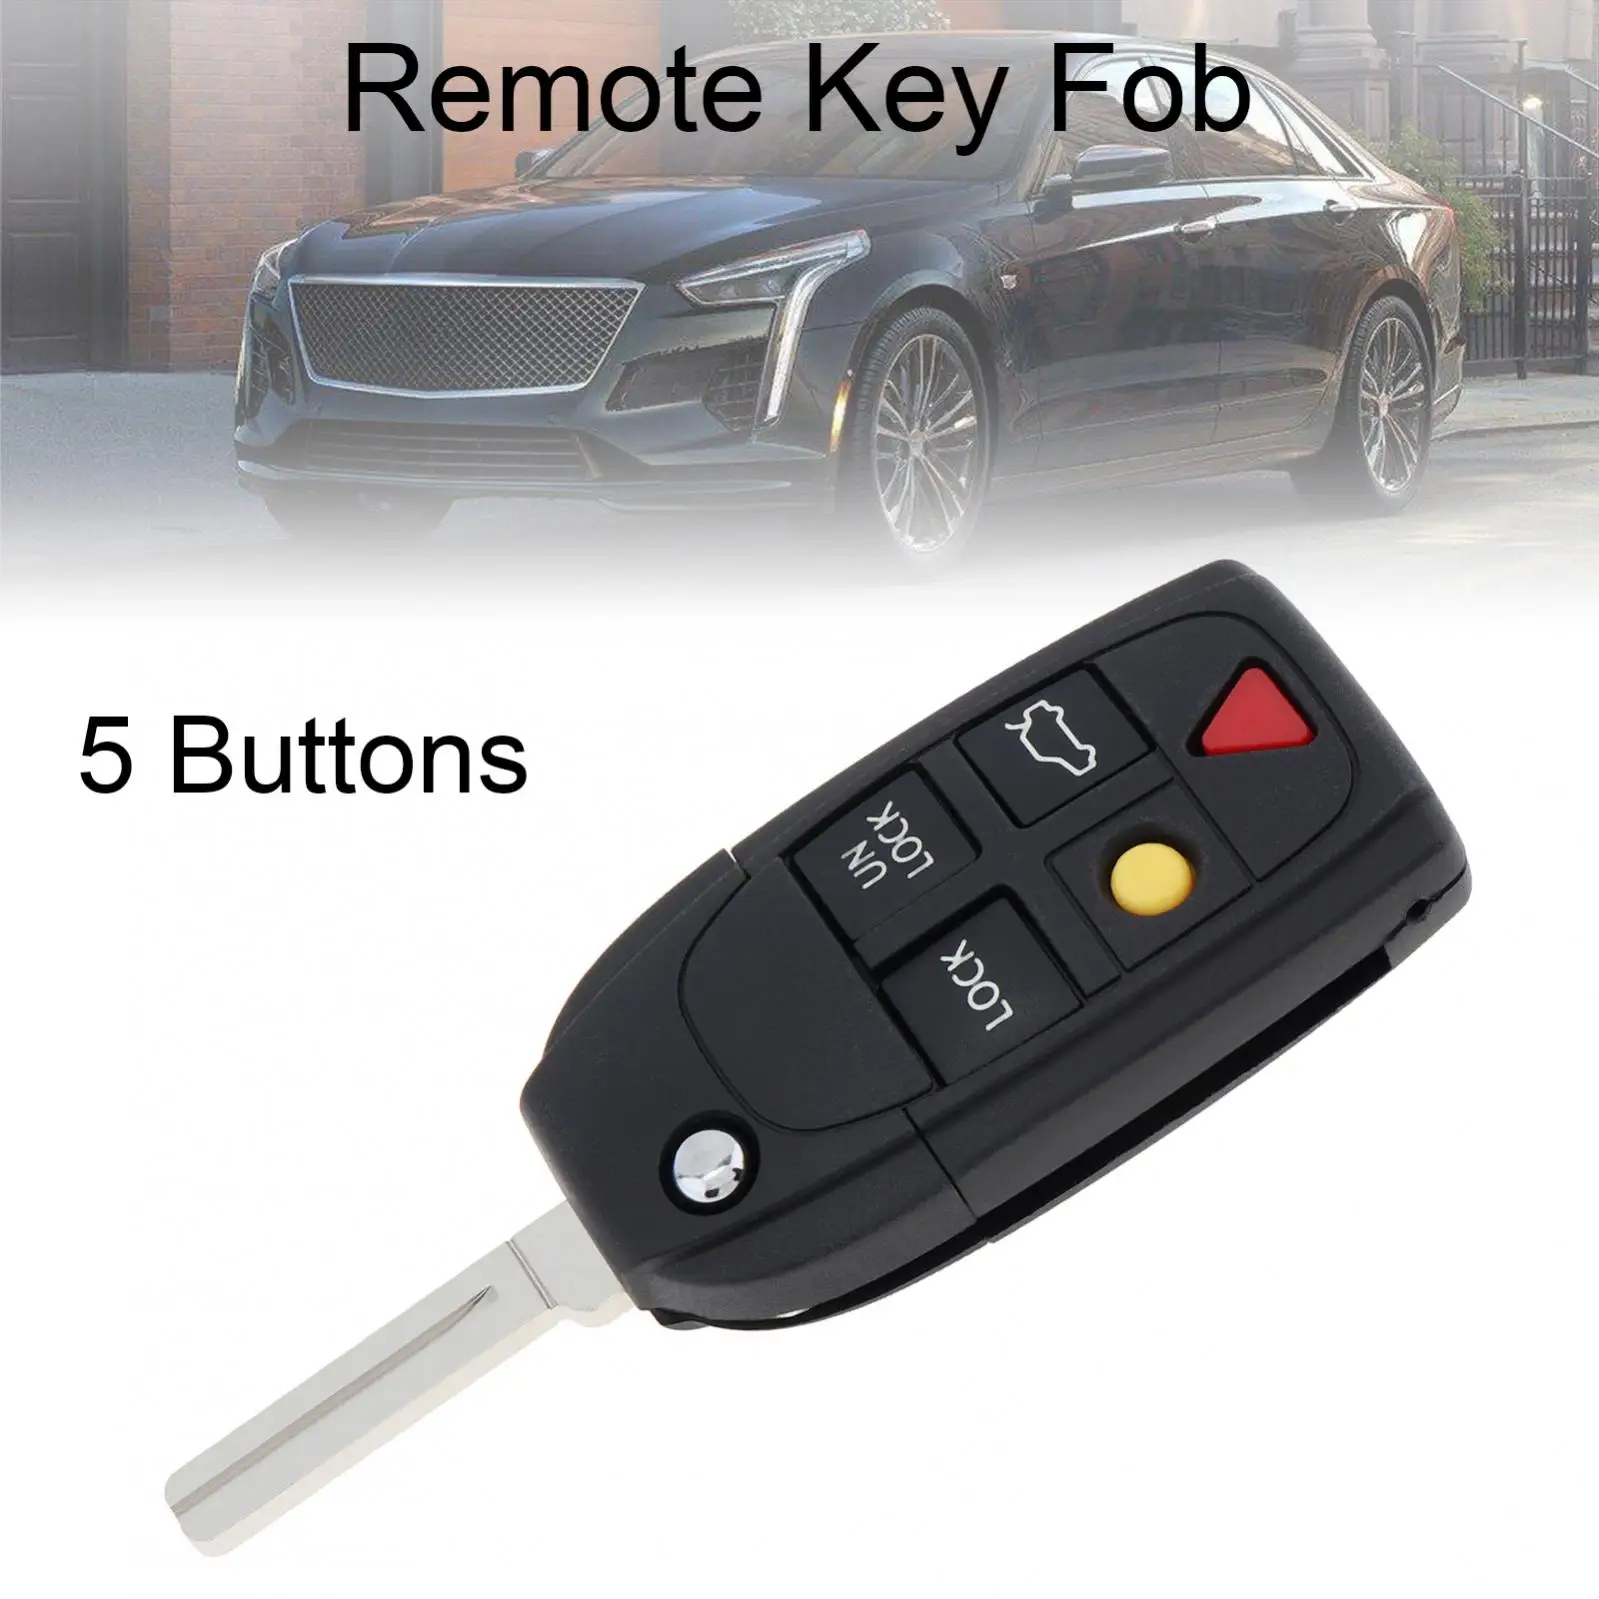 5 Buttons Car Key Fob Case Shell Replacement Flip Folding Remote Cover Car Key Accessories Fit for VOLVO S60 S80 V70 XC90 original car keyless smart remote key shell case for volvo s90 s60 s40 xc60 xc90 2016 2020 year full keyless remote key